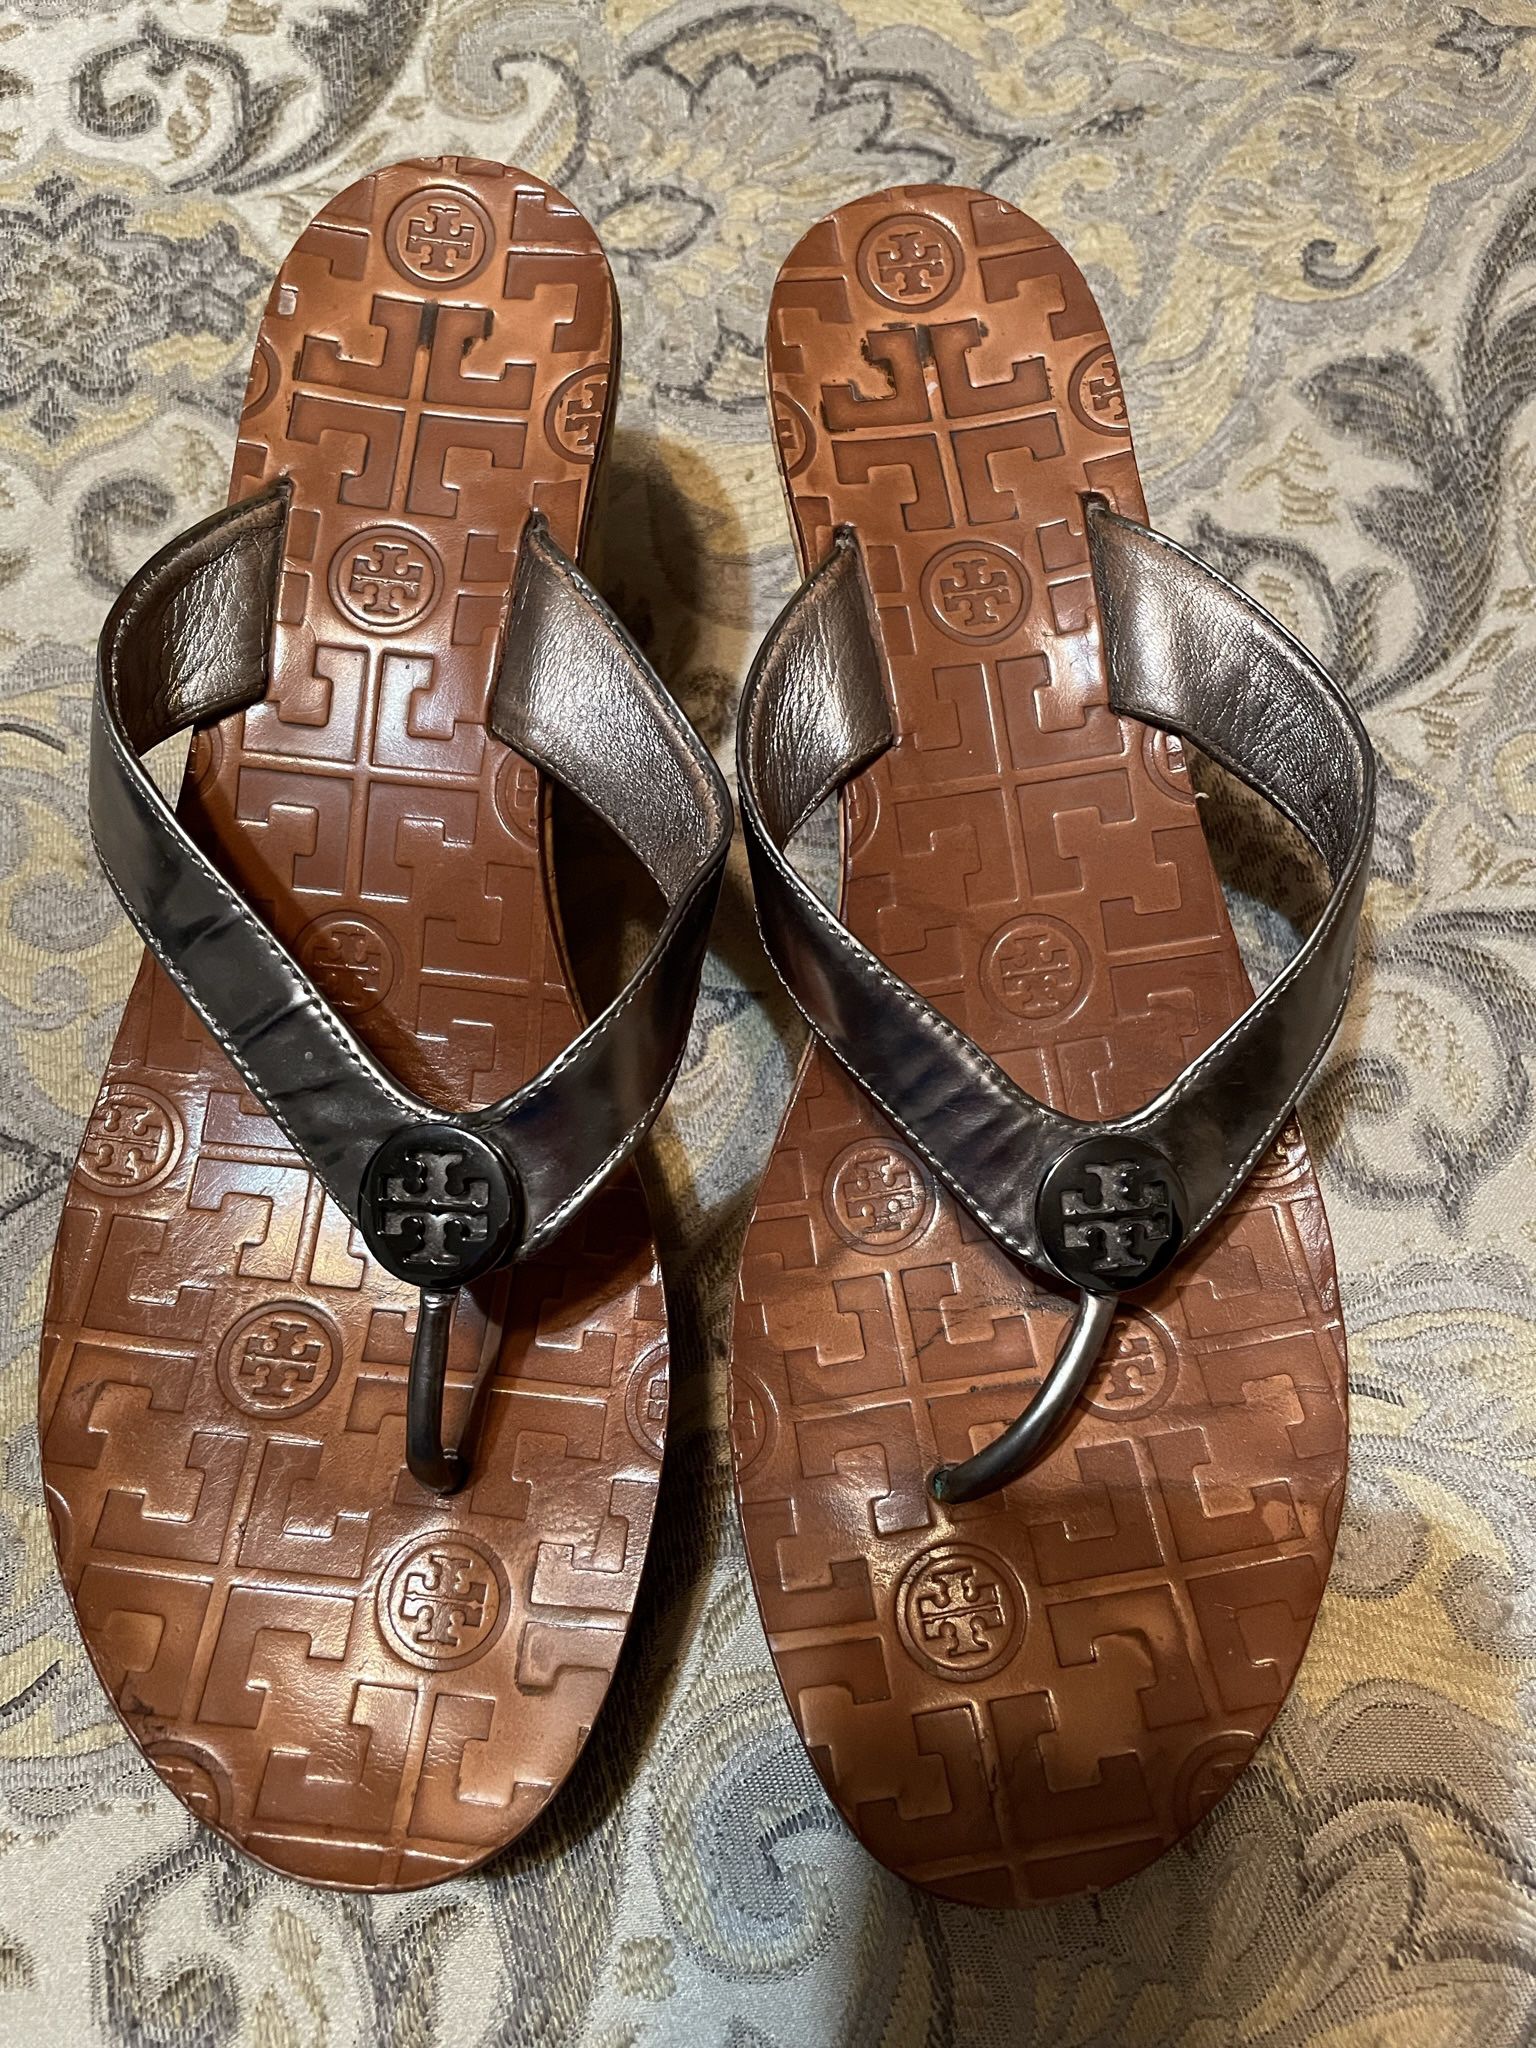 Authentic Tory Burch Sandals Size 8 for Sale in Belleville, IL - OfferUp